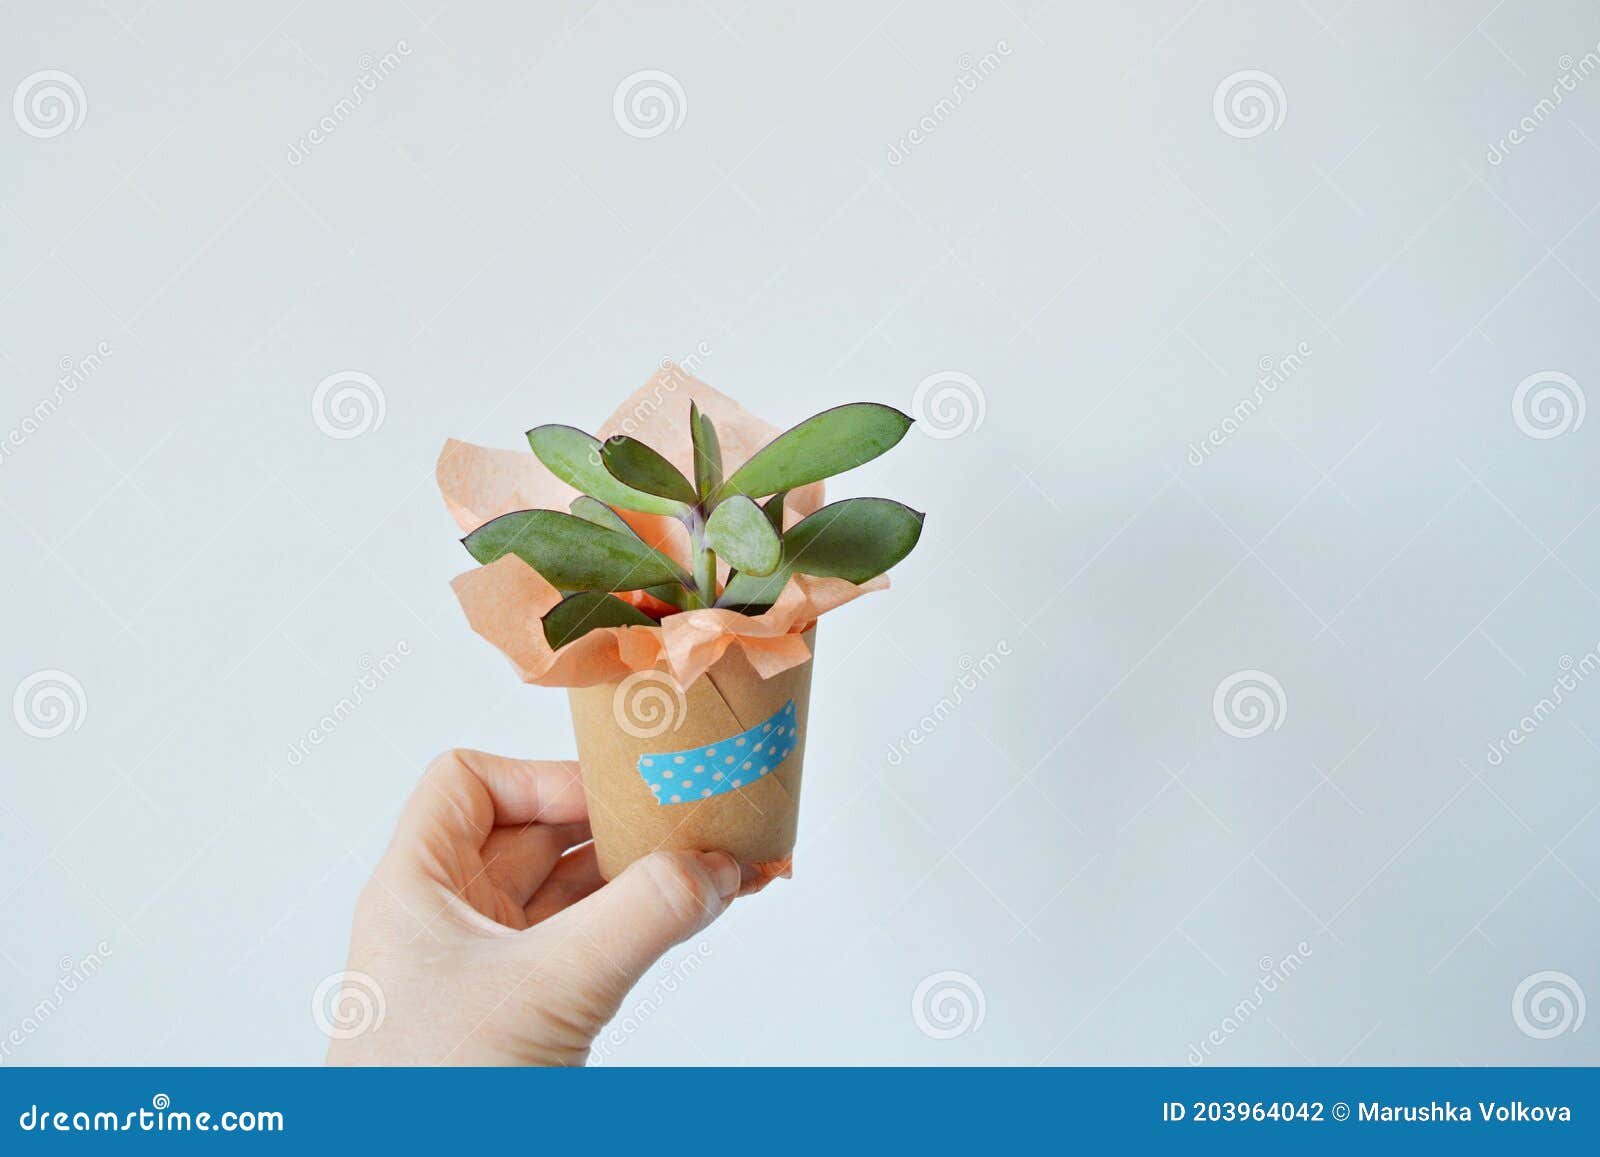 hand holding senecio crassicaulis blue-grey house plant in  tissue and kraft paper wrapping